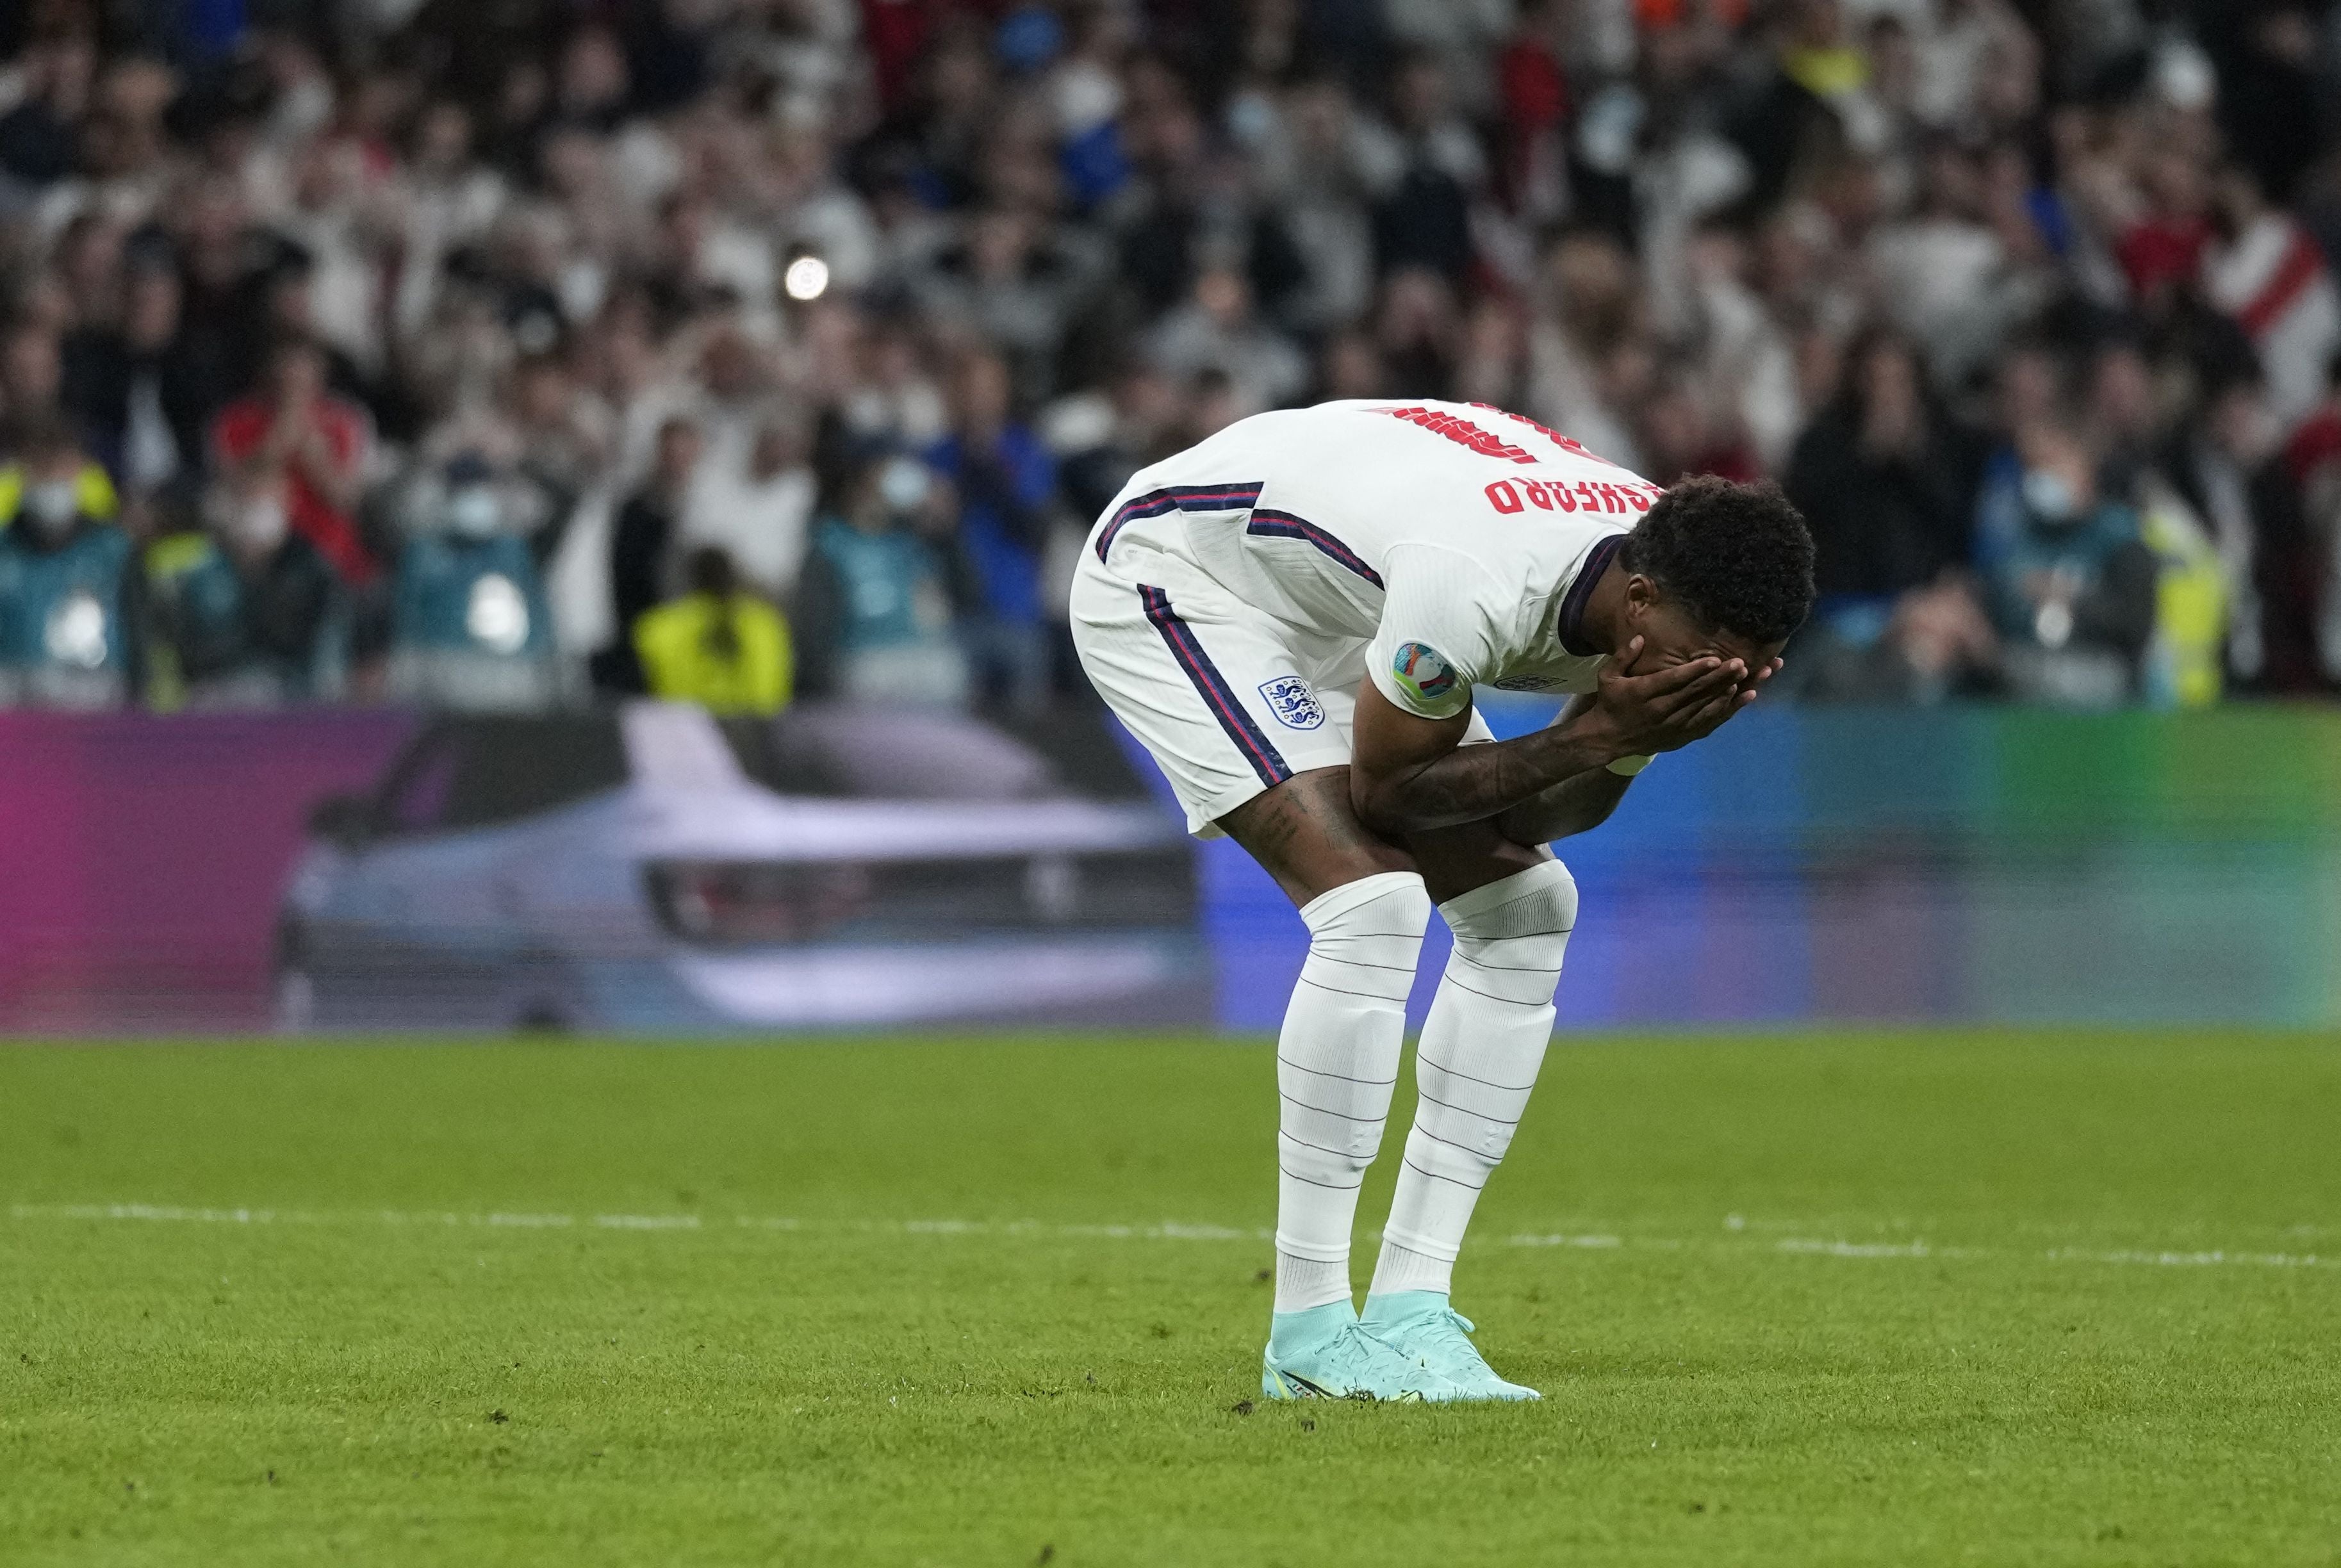 Marcus Rashford is distraught after failing to score in the penalty shootout